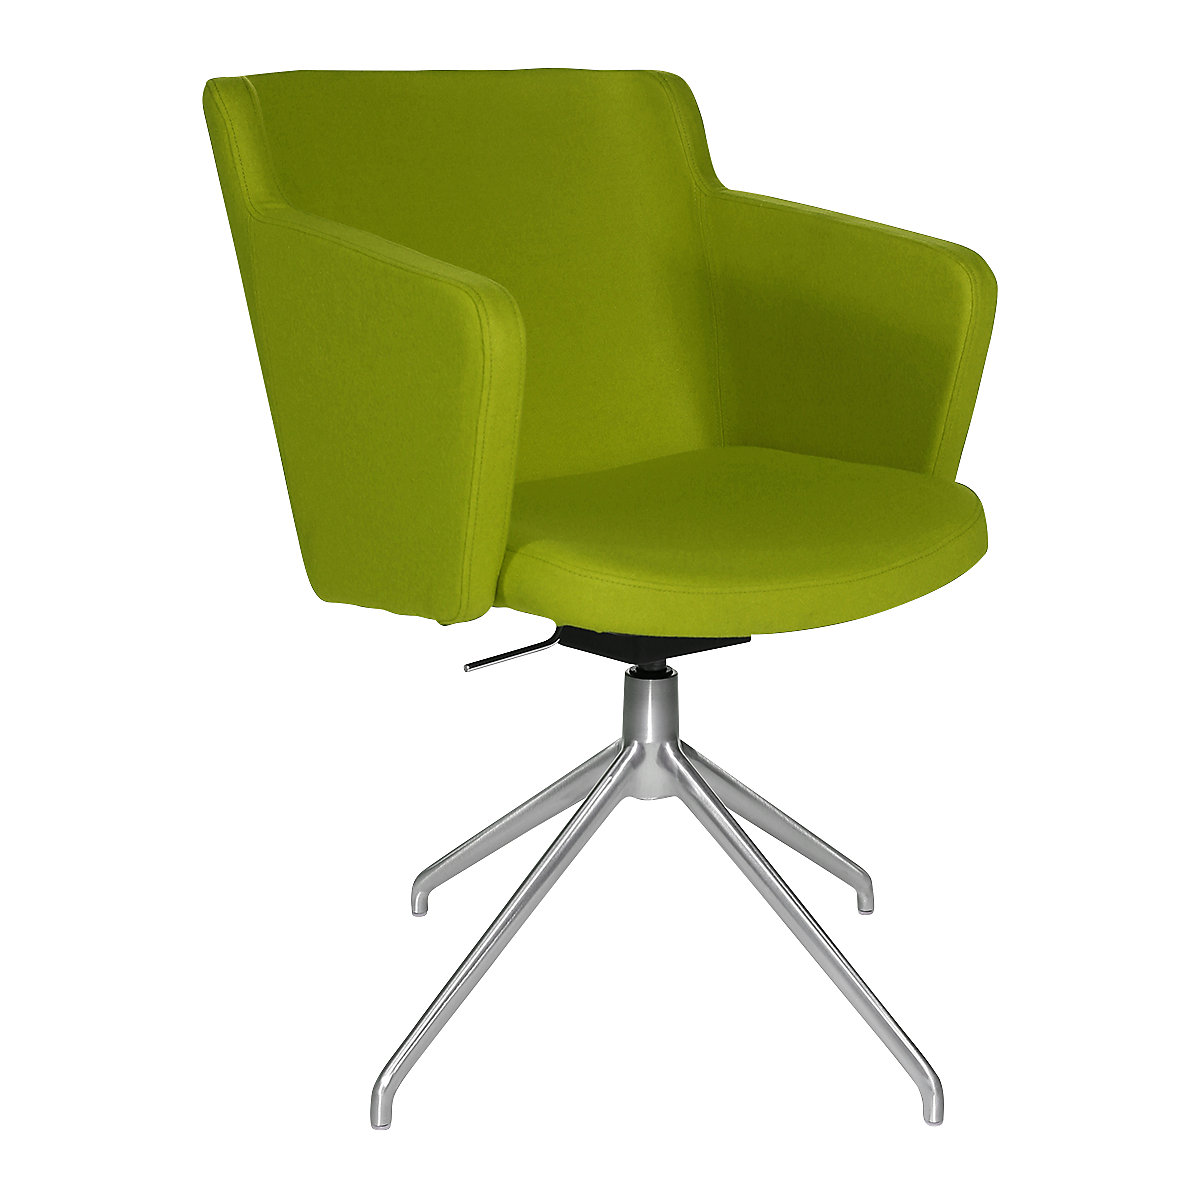 SFH visitors’ chair – Topstar, 3D seat joint and aluminium five star base, green-14